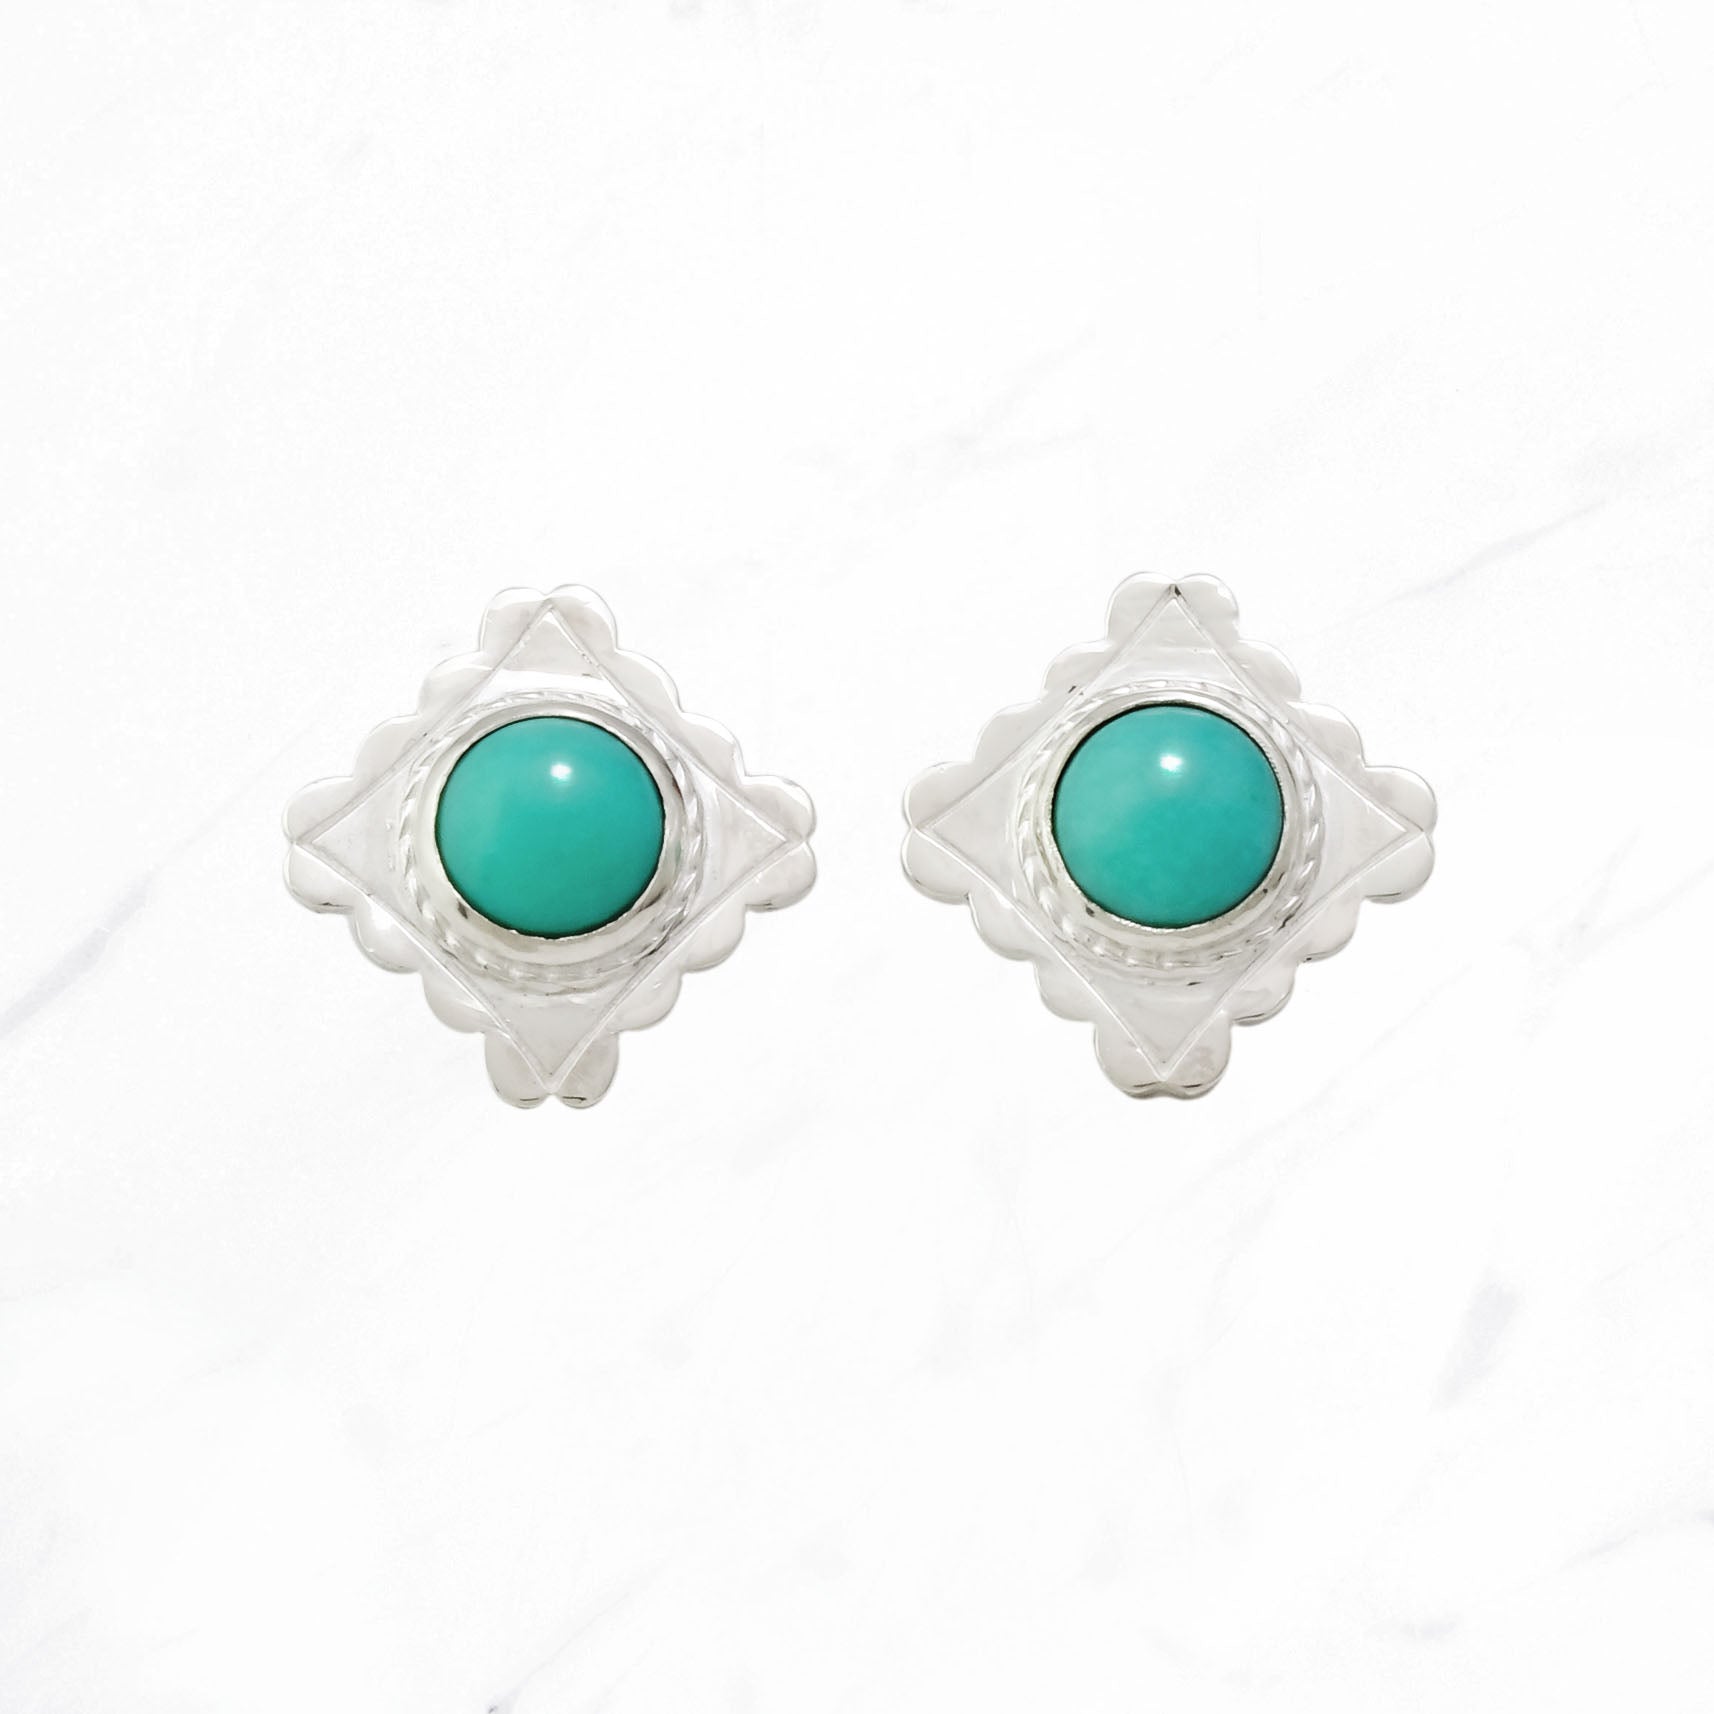 Silver Scalloped Trim Earrings (Turquoise)